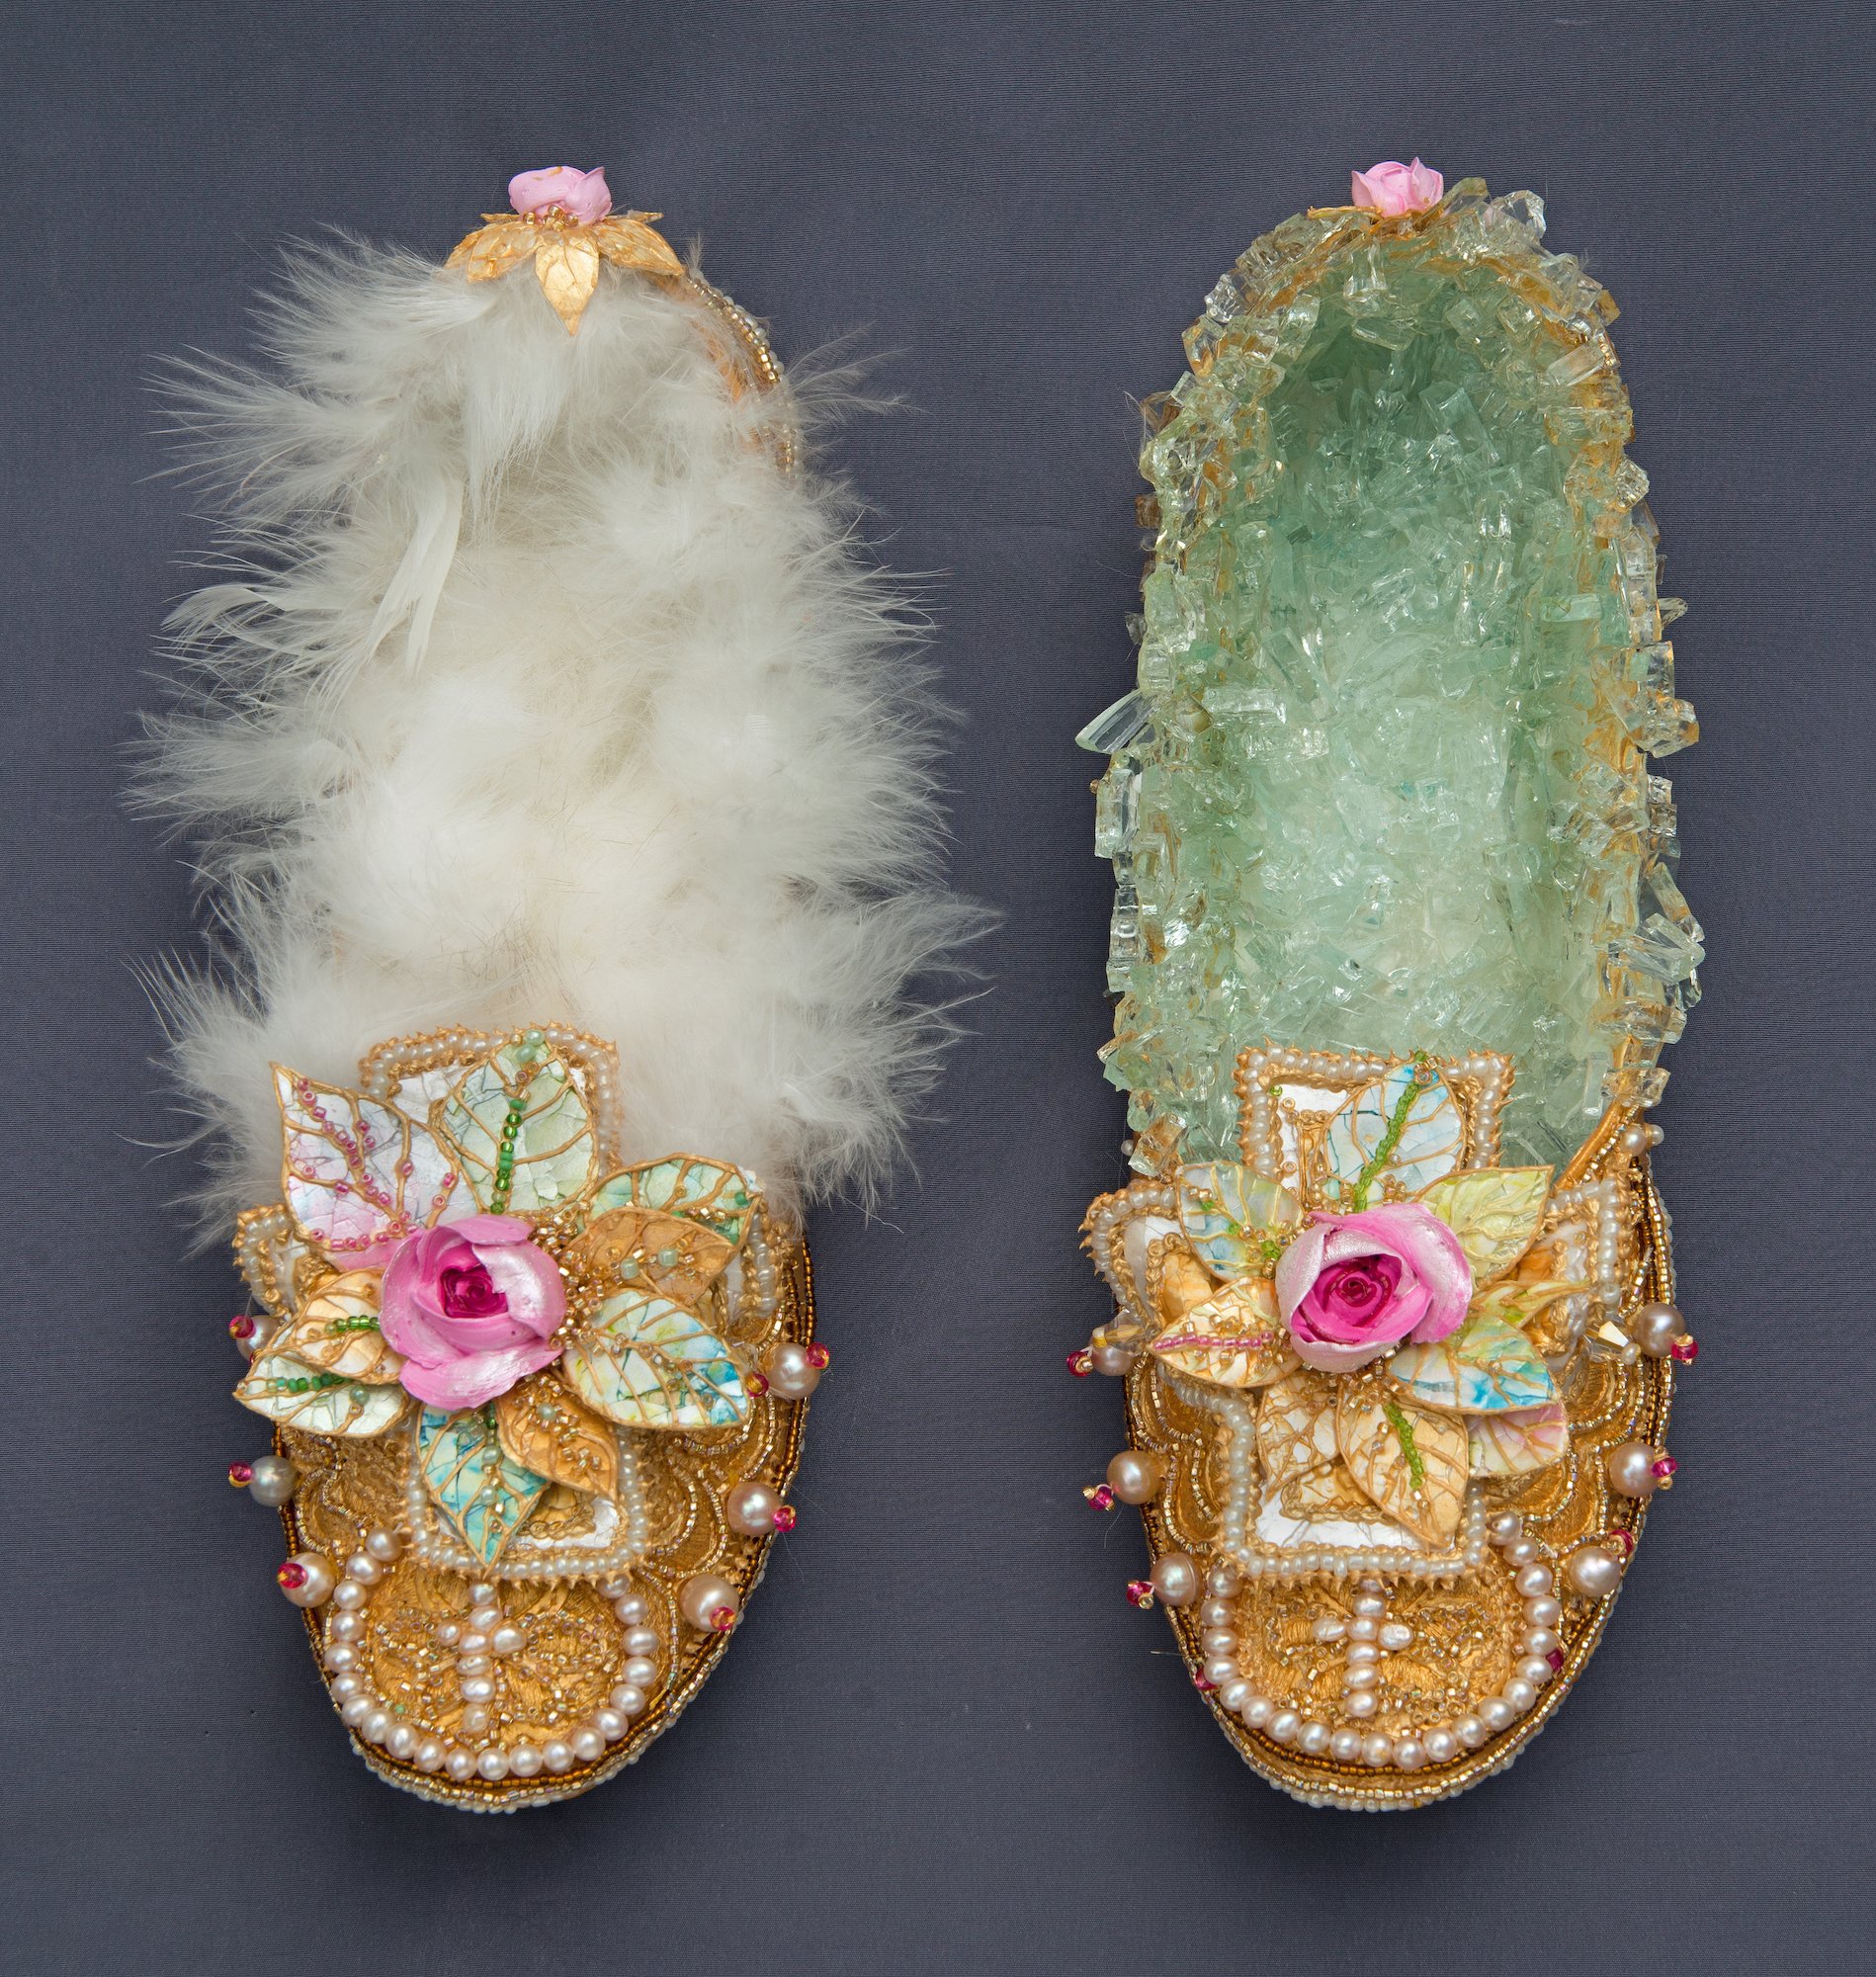 Gold shoes with pearls, roses, and leaves, one with a feather footbed and one with a footbed of glass shards.